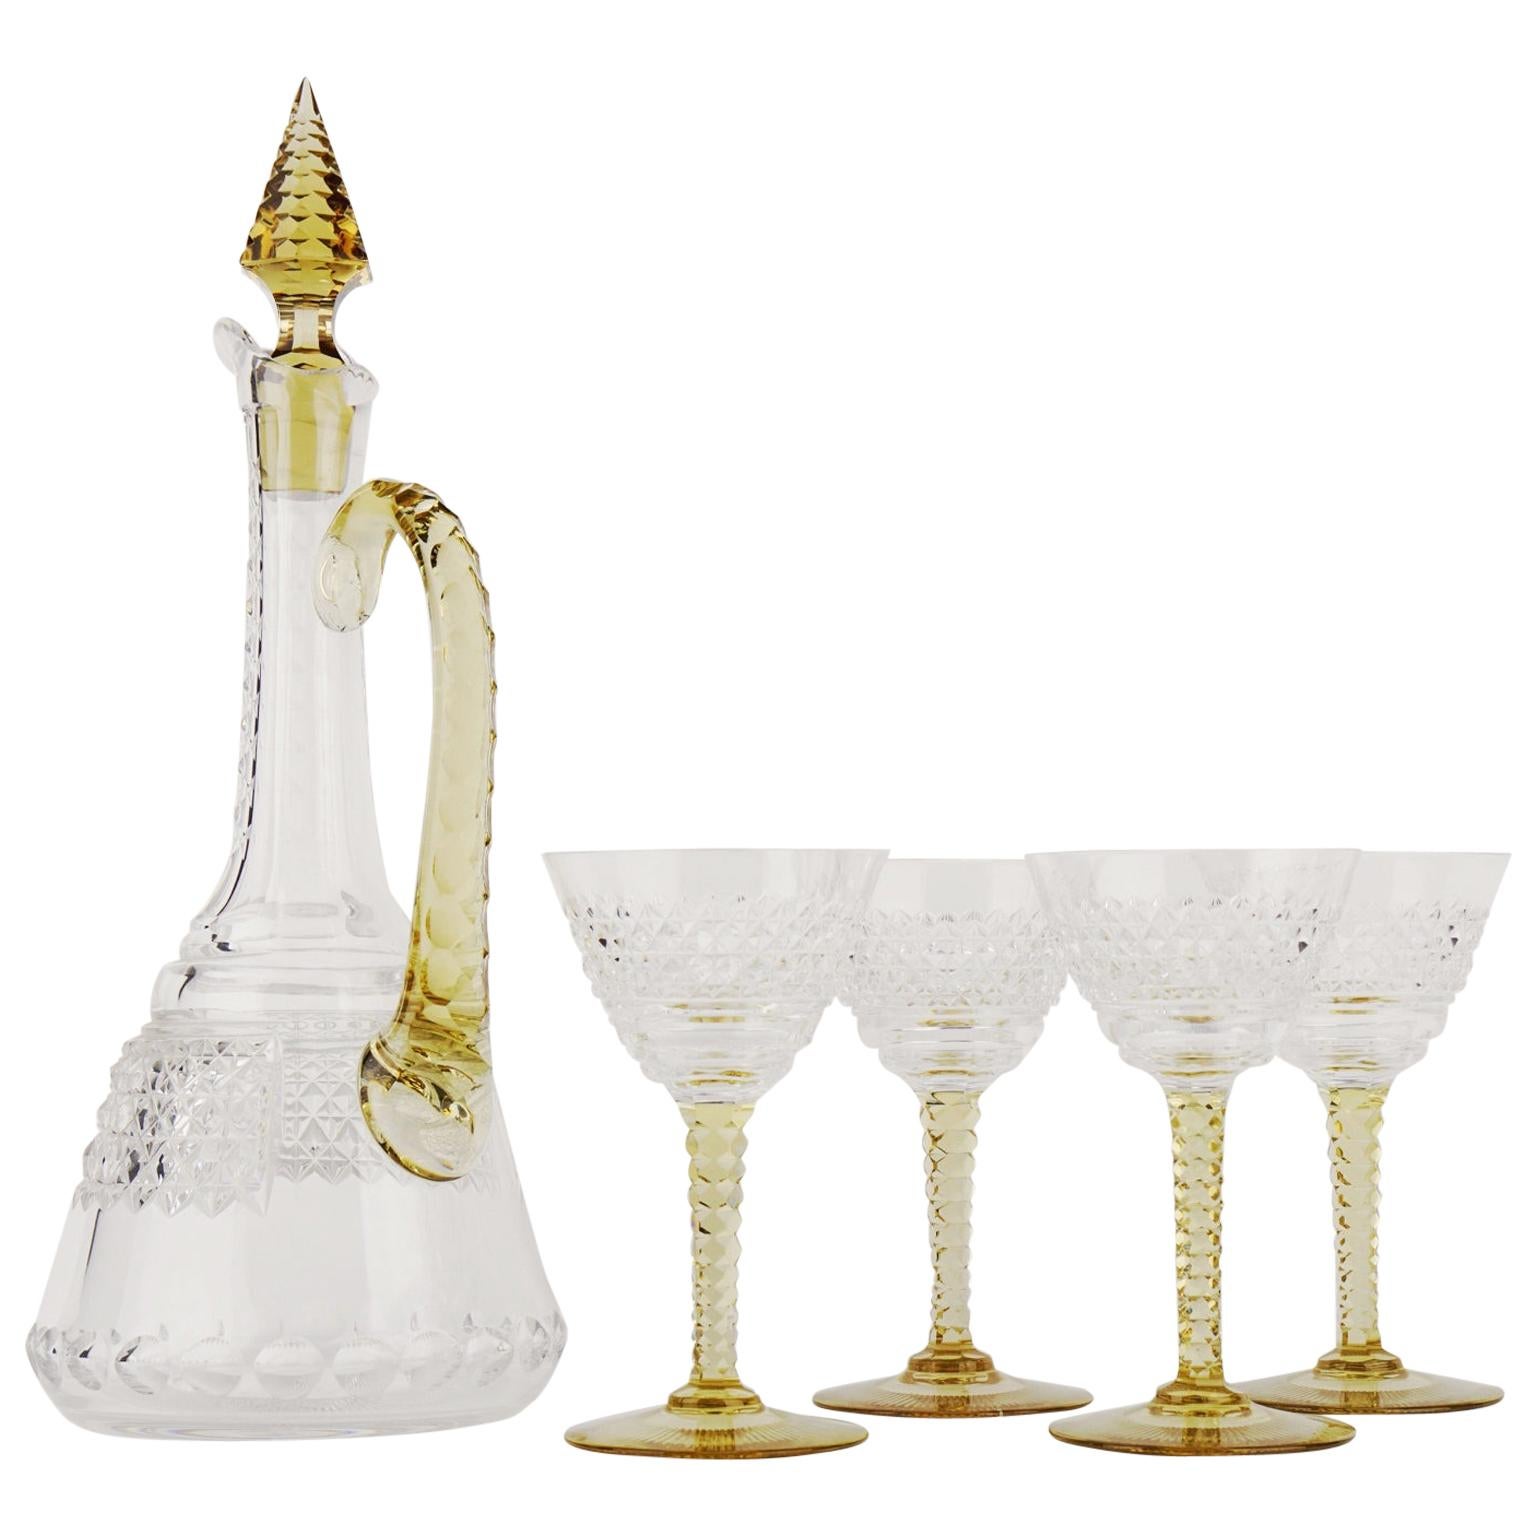 Art Deco Crystal Topaz and White Liquor Service Decanter and Glasses For Sale